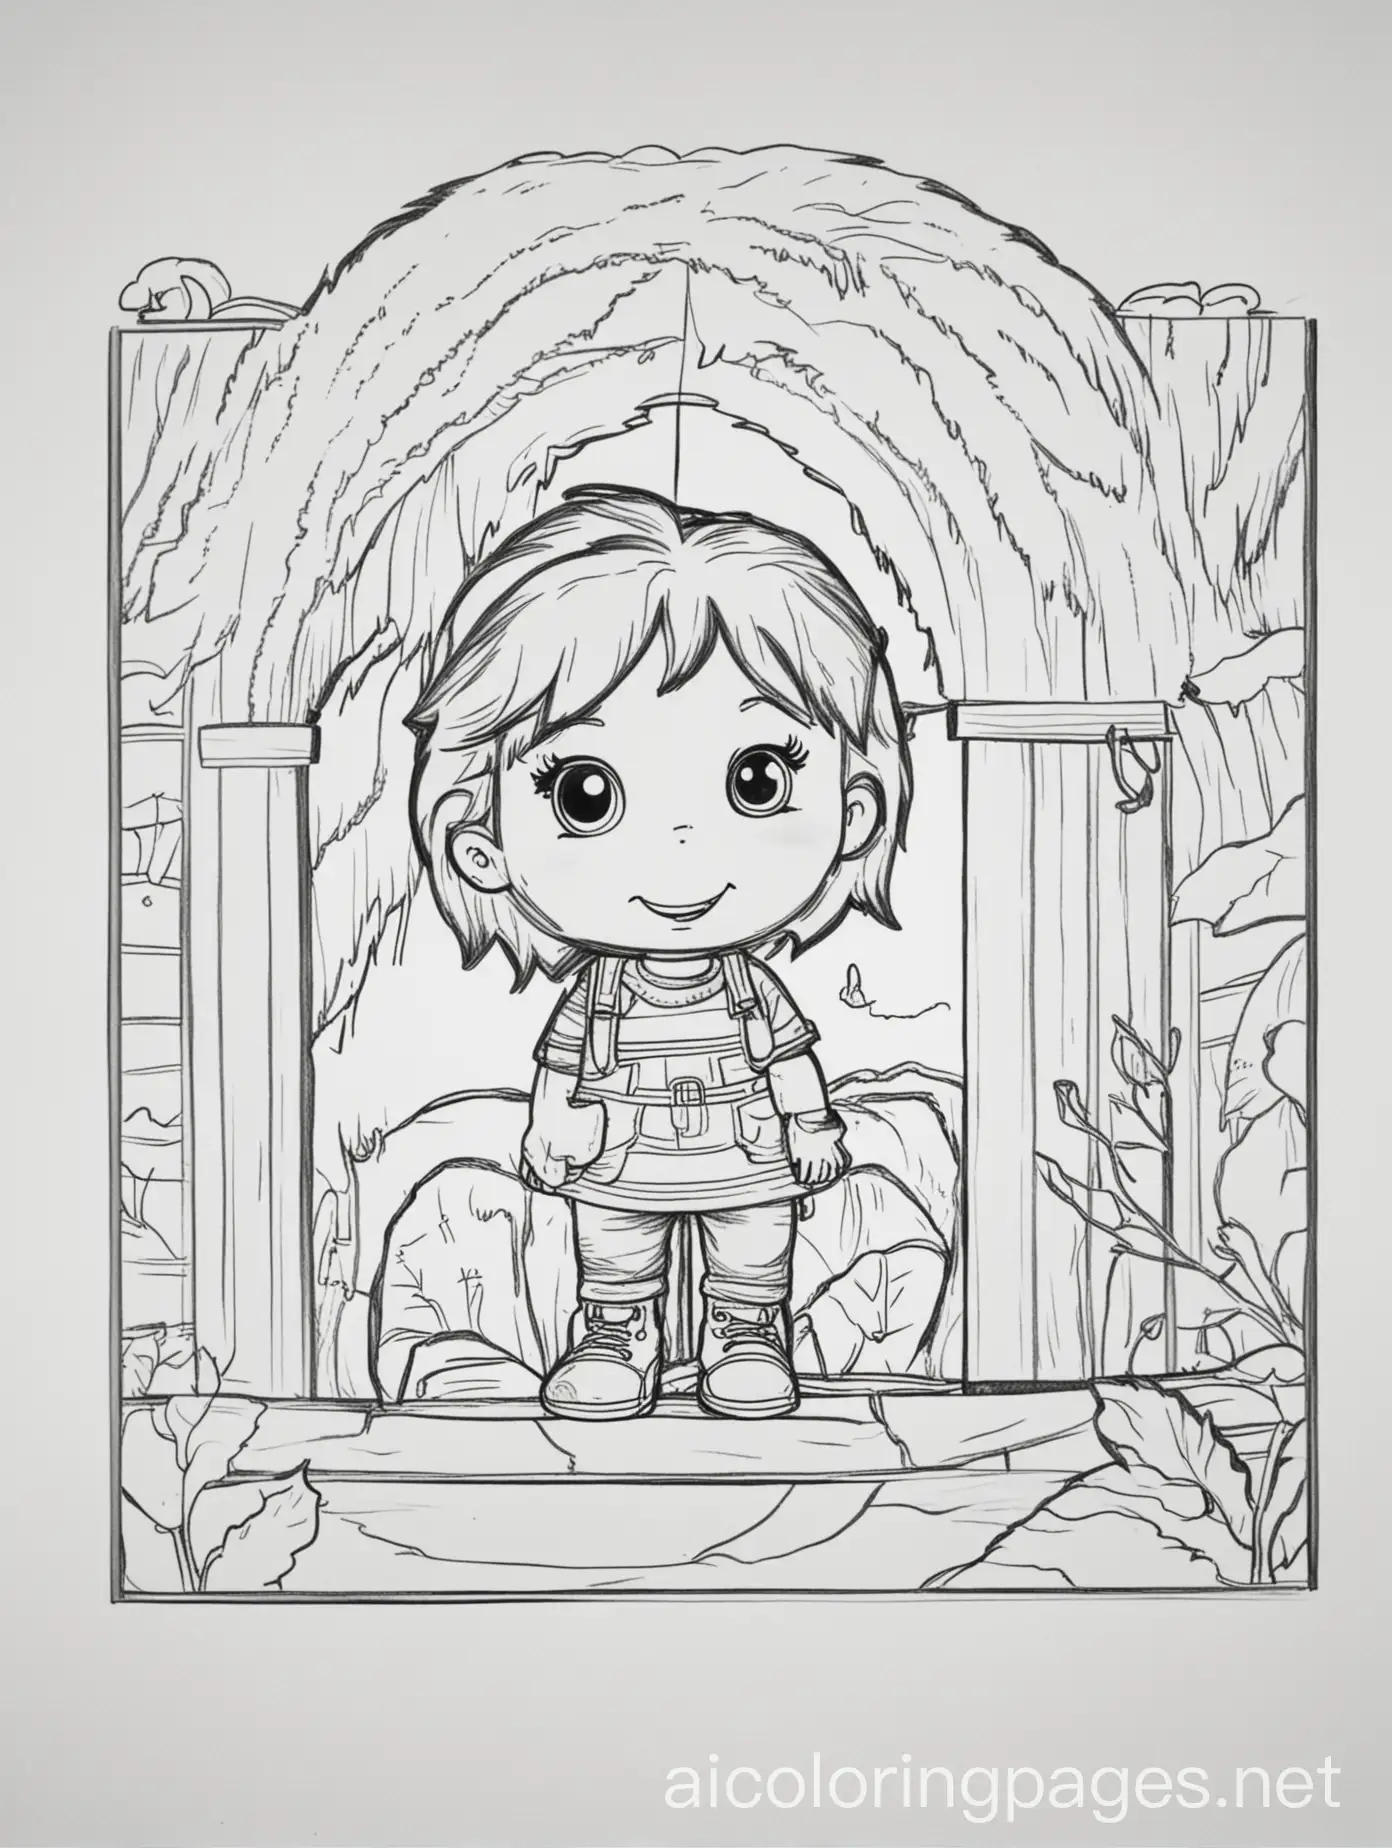 Hide and Seek kids, playing , Coloring Page, black and white, line art, white background, Simplicity, Ample White Space. The background of the coloring page is plain white to make it easy for young children to color within the lines. The outlines of all the subjects are easy to distinguish, making it simple for kids to color without too much difficulty